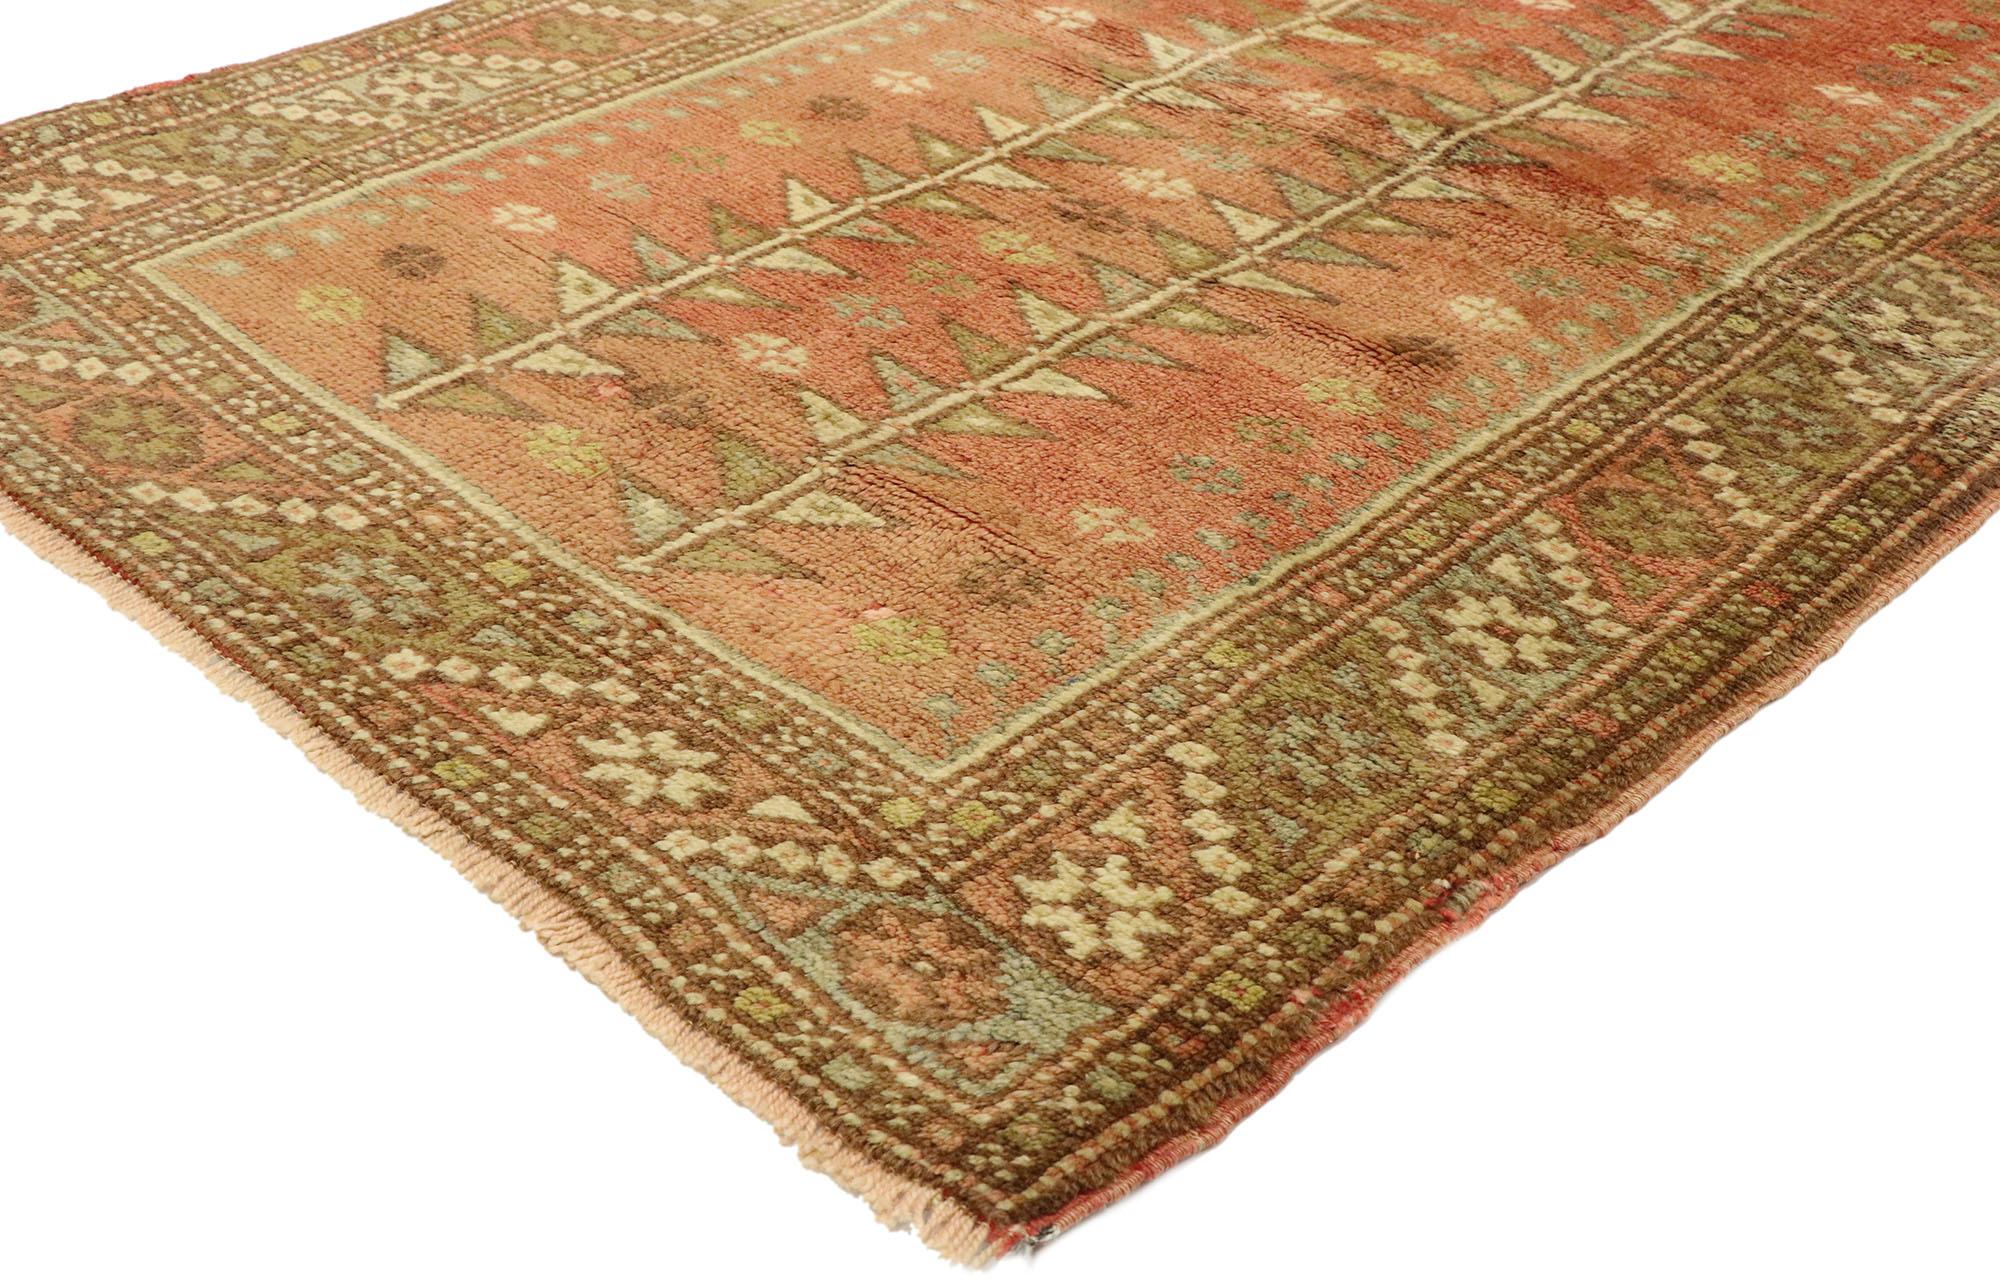 51384 Vintage Turkish Oushak Rug, 03'02  X 04'08. Small Turkish Oushak rugs with a mihrab design are traditional carpets originating from the Oushak region of Turkey. They feature a central mihrab, an arch-like niche representing the direction of